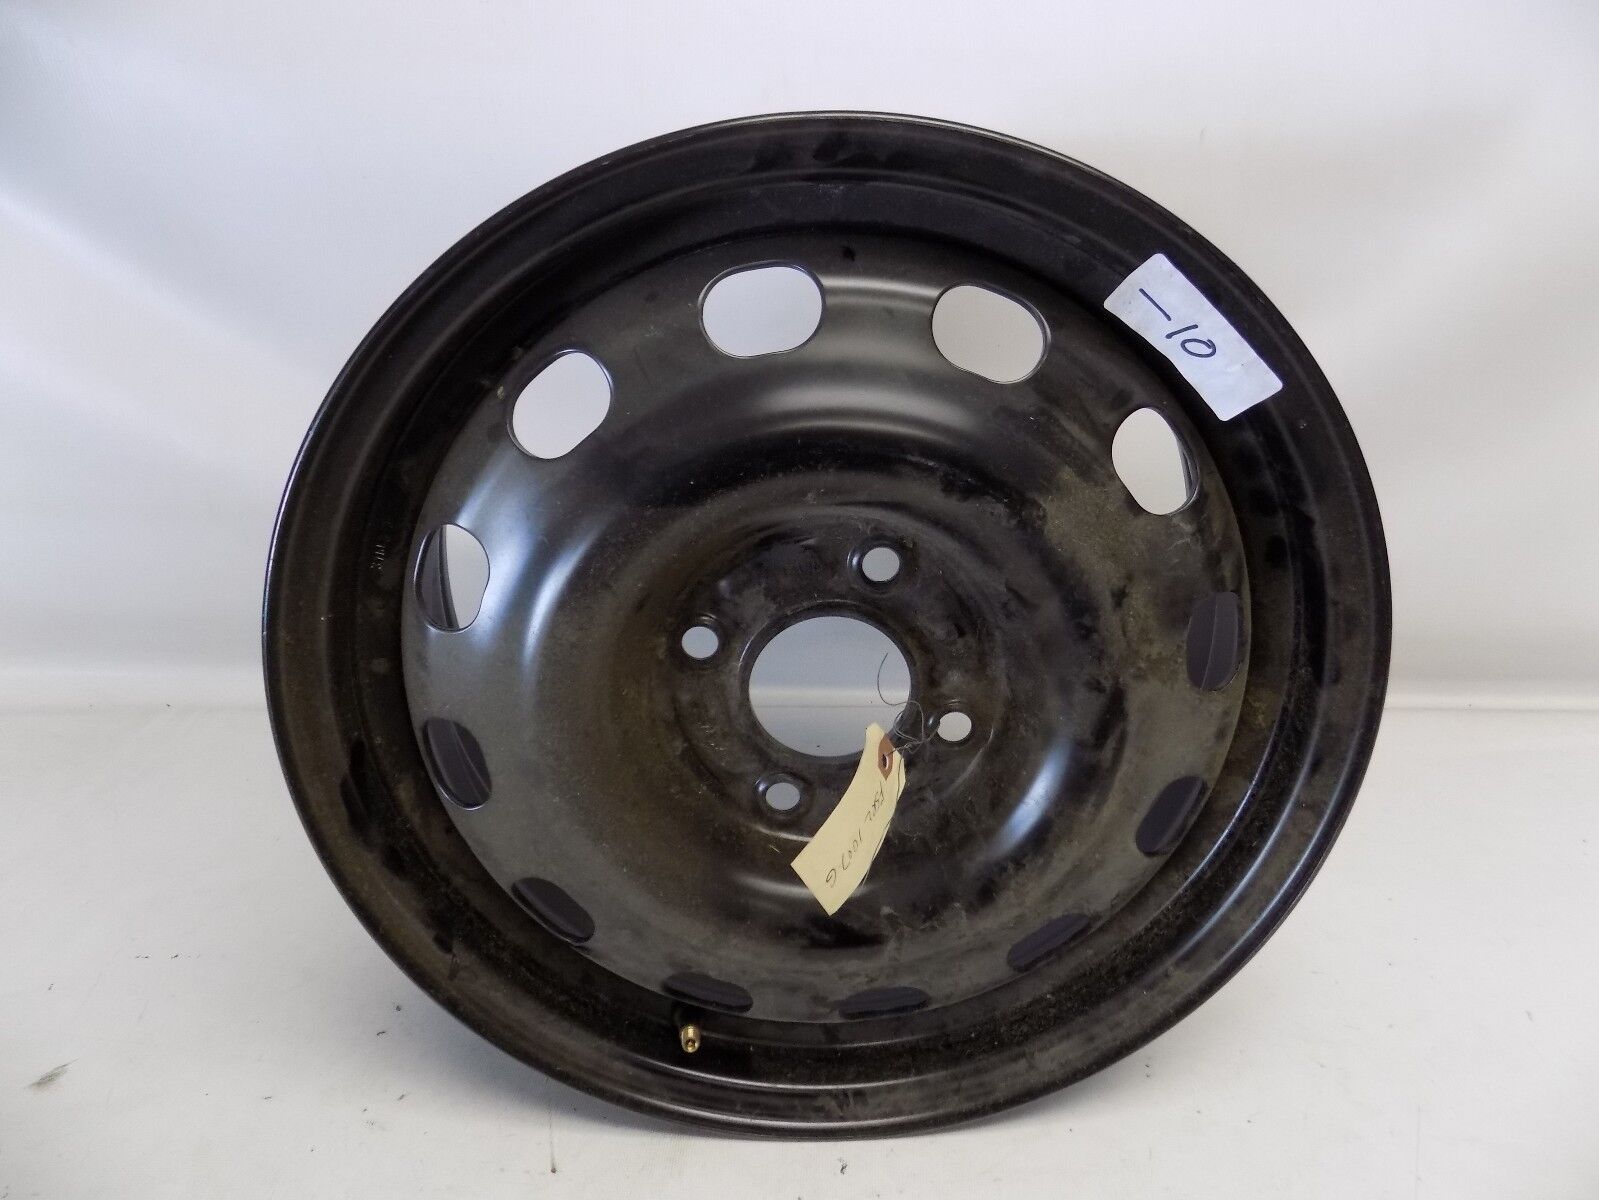 New OEM 1995 1996 1997 1998 1999 2000 Ford Contour Wheel Rim Assembly F5RZ1007G